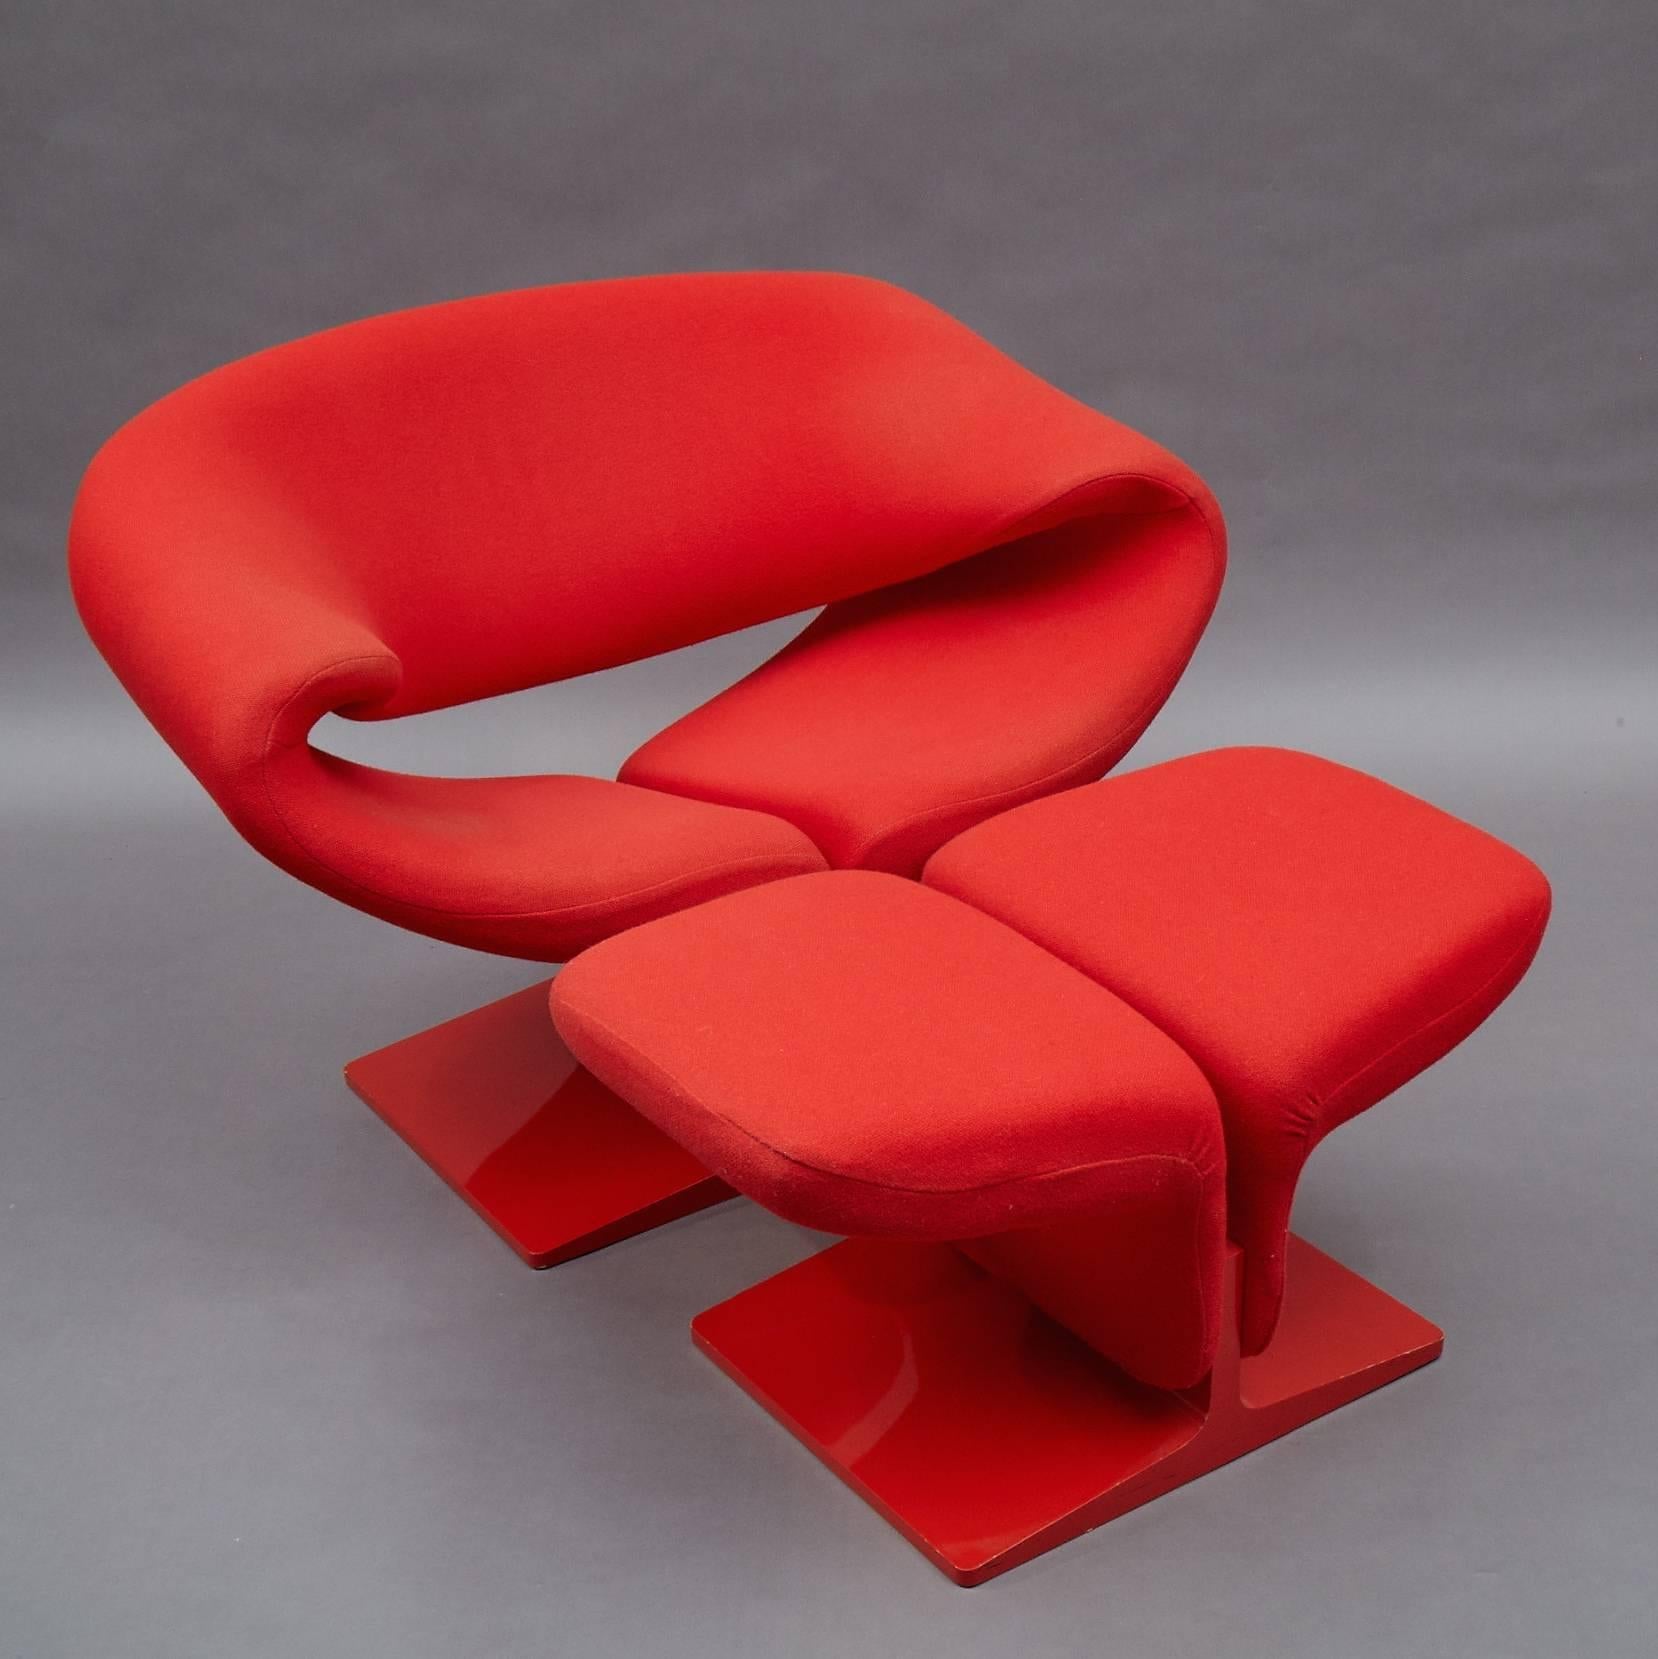 This iconic and innovative ribbon chair and matching ottoman designed by Pierre Paulin for Artifort is a stunning organic form of contoured tubular steel that is ergonomically designed for comfort. They have monochromatic lipstick red, lacquered